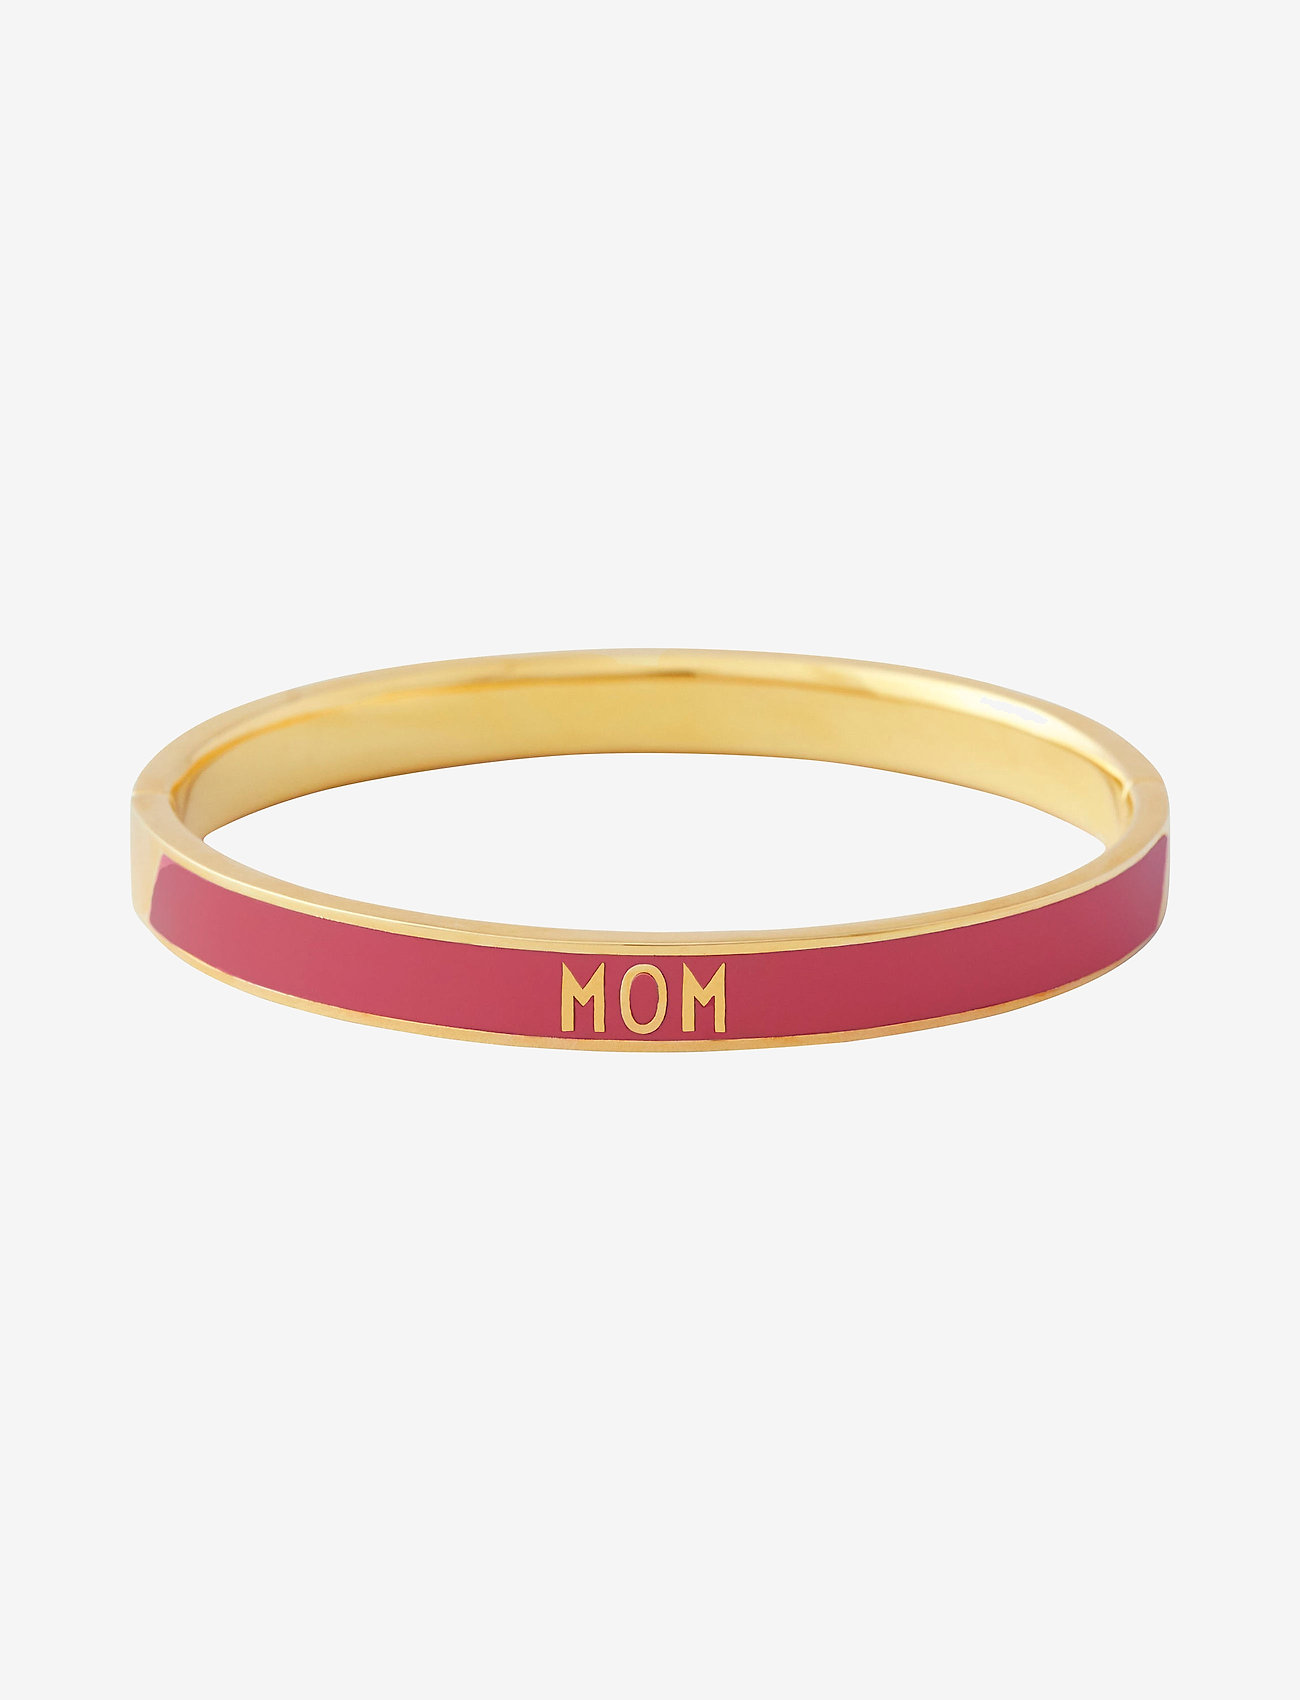 Design Letters - Word Candy Bangle - festmode zu outlet-preisen - armom - 0